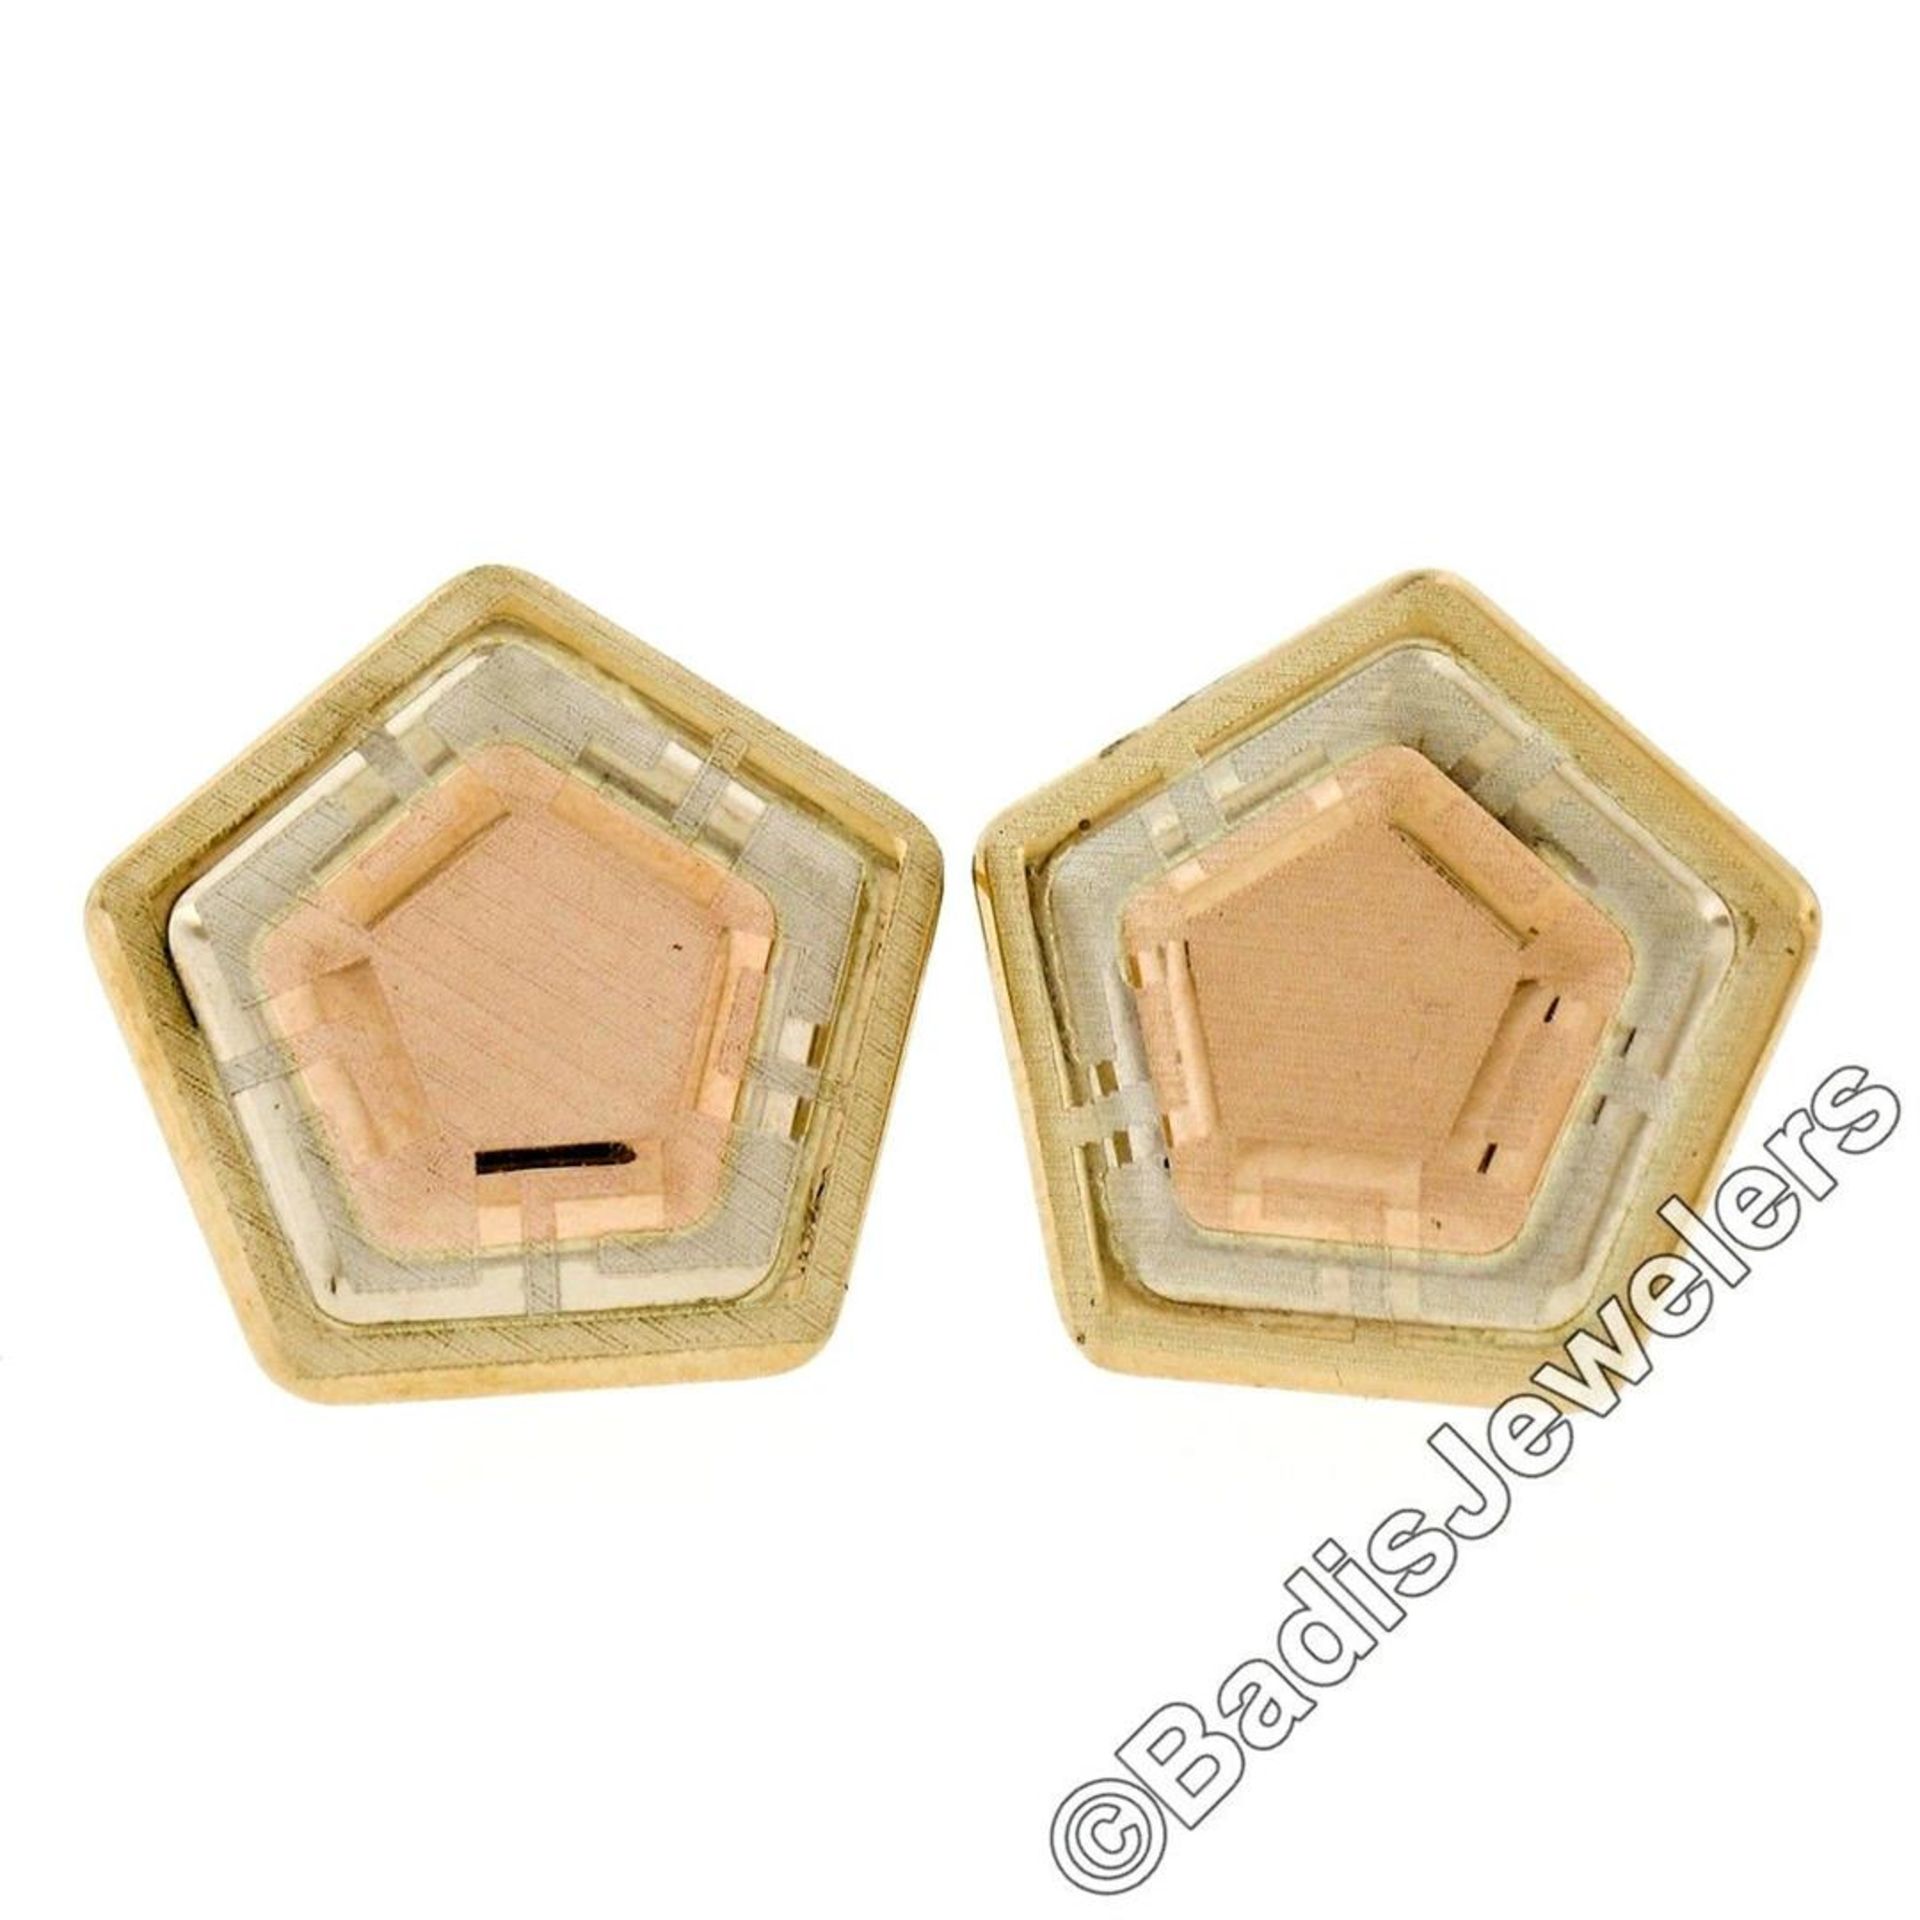 New 14kt Rose, White, and Yellow Gold Stone Finished Tiered Pentagon Stud Earrin